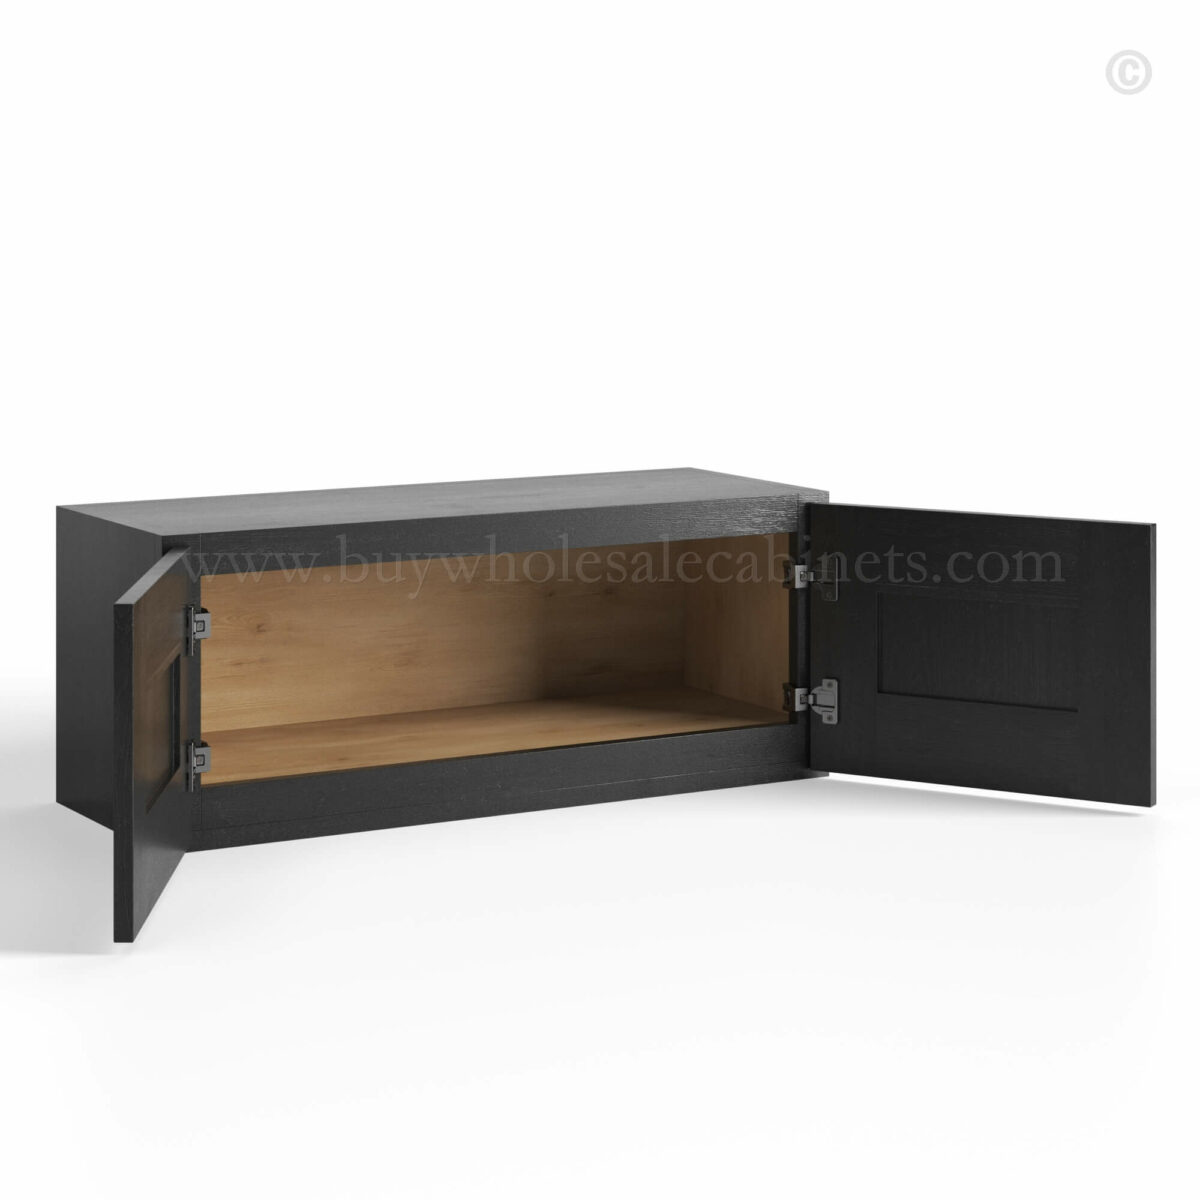 charcoal black shaker wall cabinets 12 H with two doors open, rta cabinets, wholesale cabinets